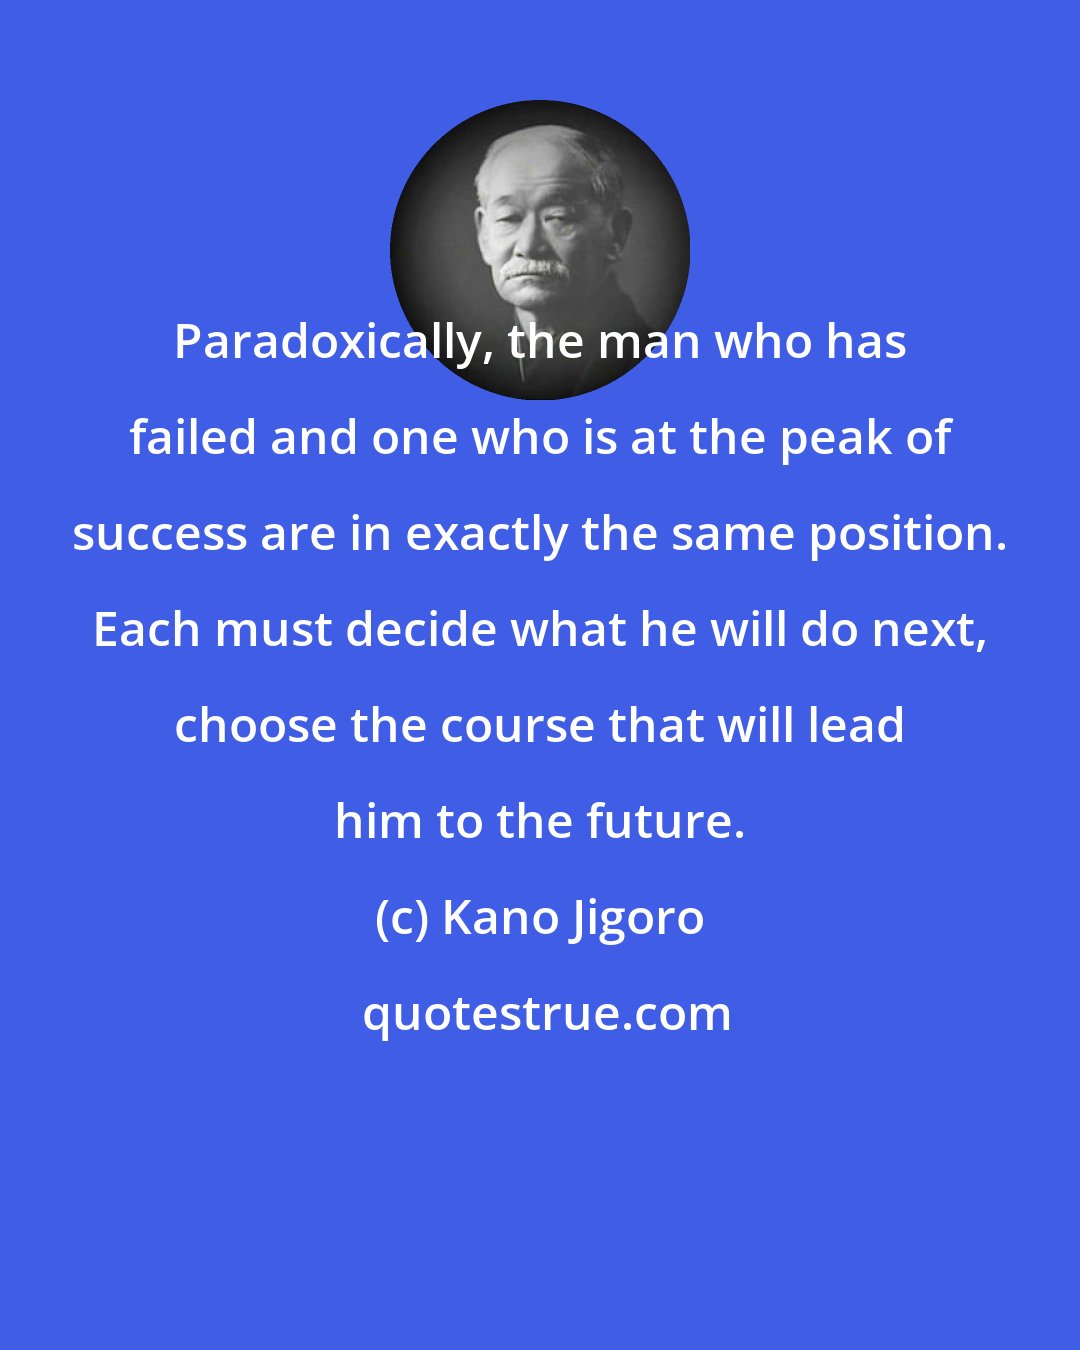 Kano Jigoro: Paradoxically, the man who has failed and one who is at the peak of success are in exactly the same position. Each must decide what he will do next, choose the course that will lead him to the future.